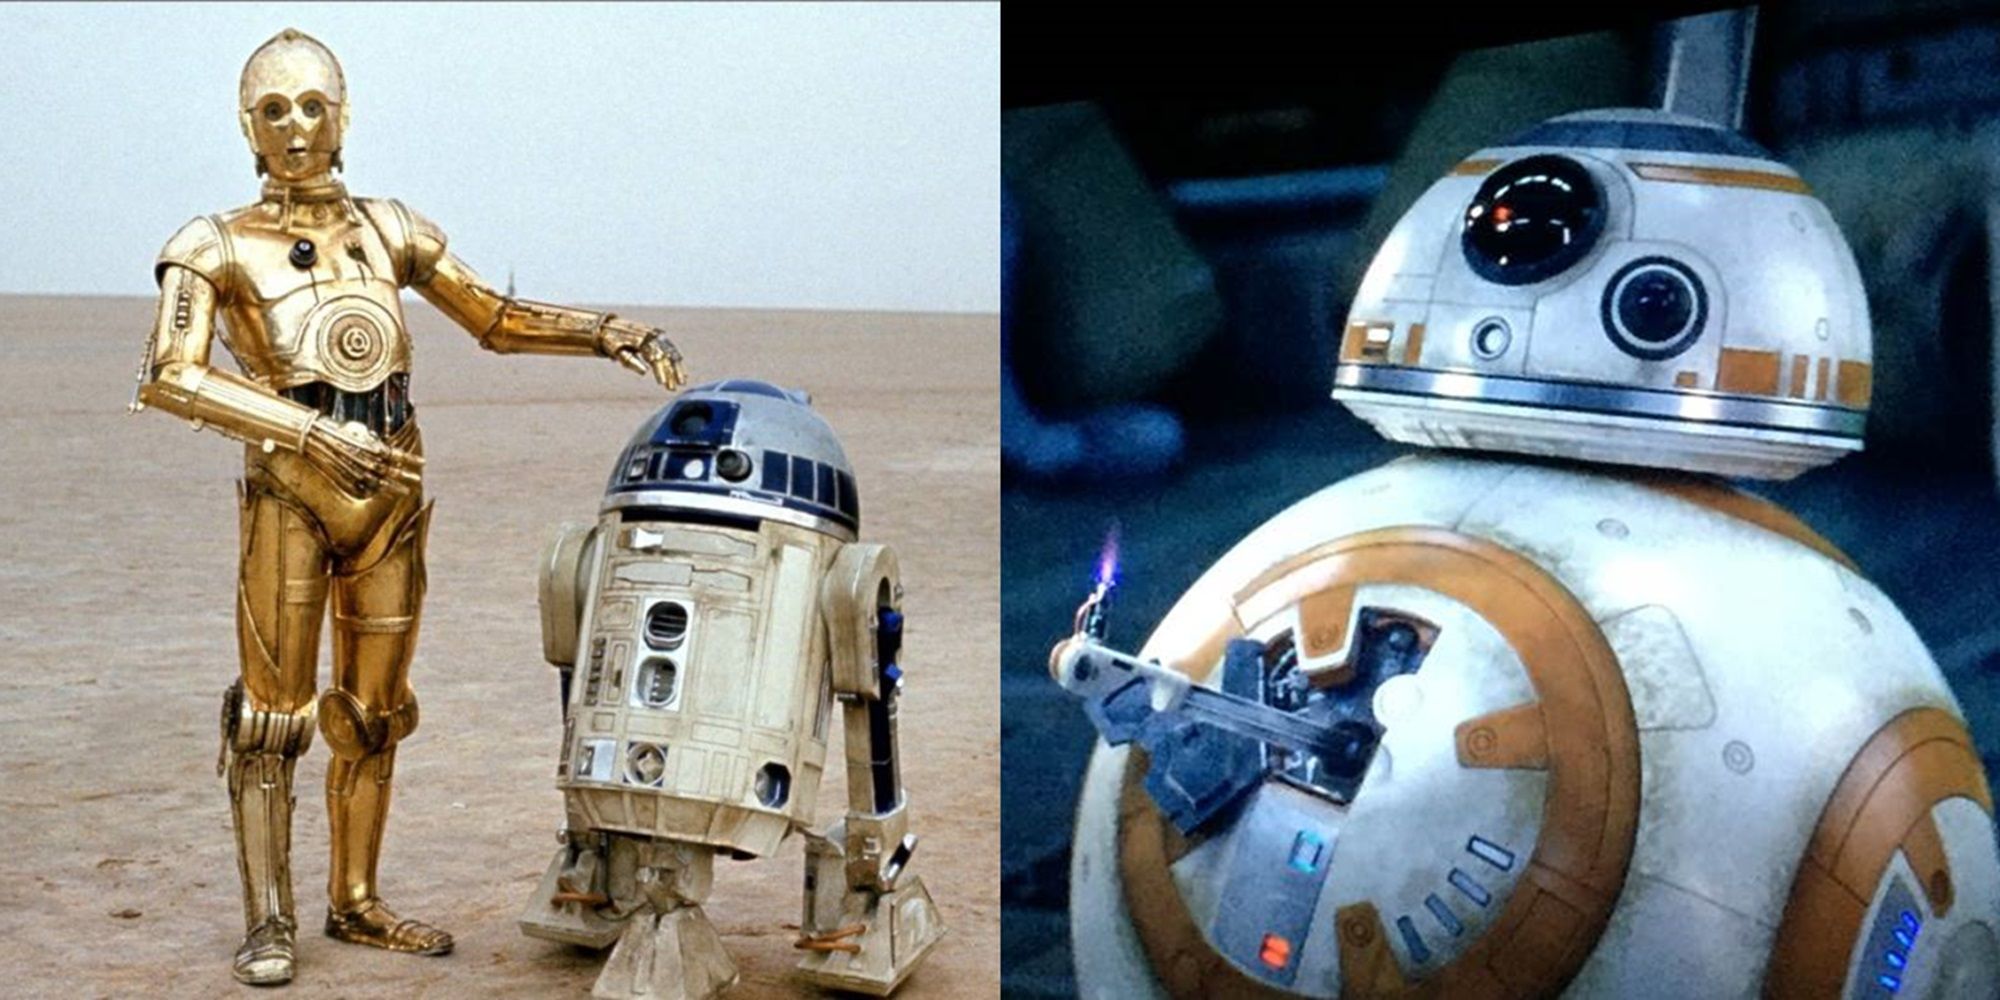 Split_image_of_C-3PO_and_R2-D2_in_Star_Wars_and_BB-8_in_The_Force_Awakens